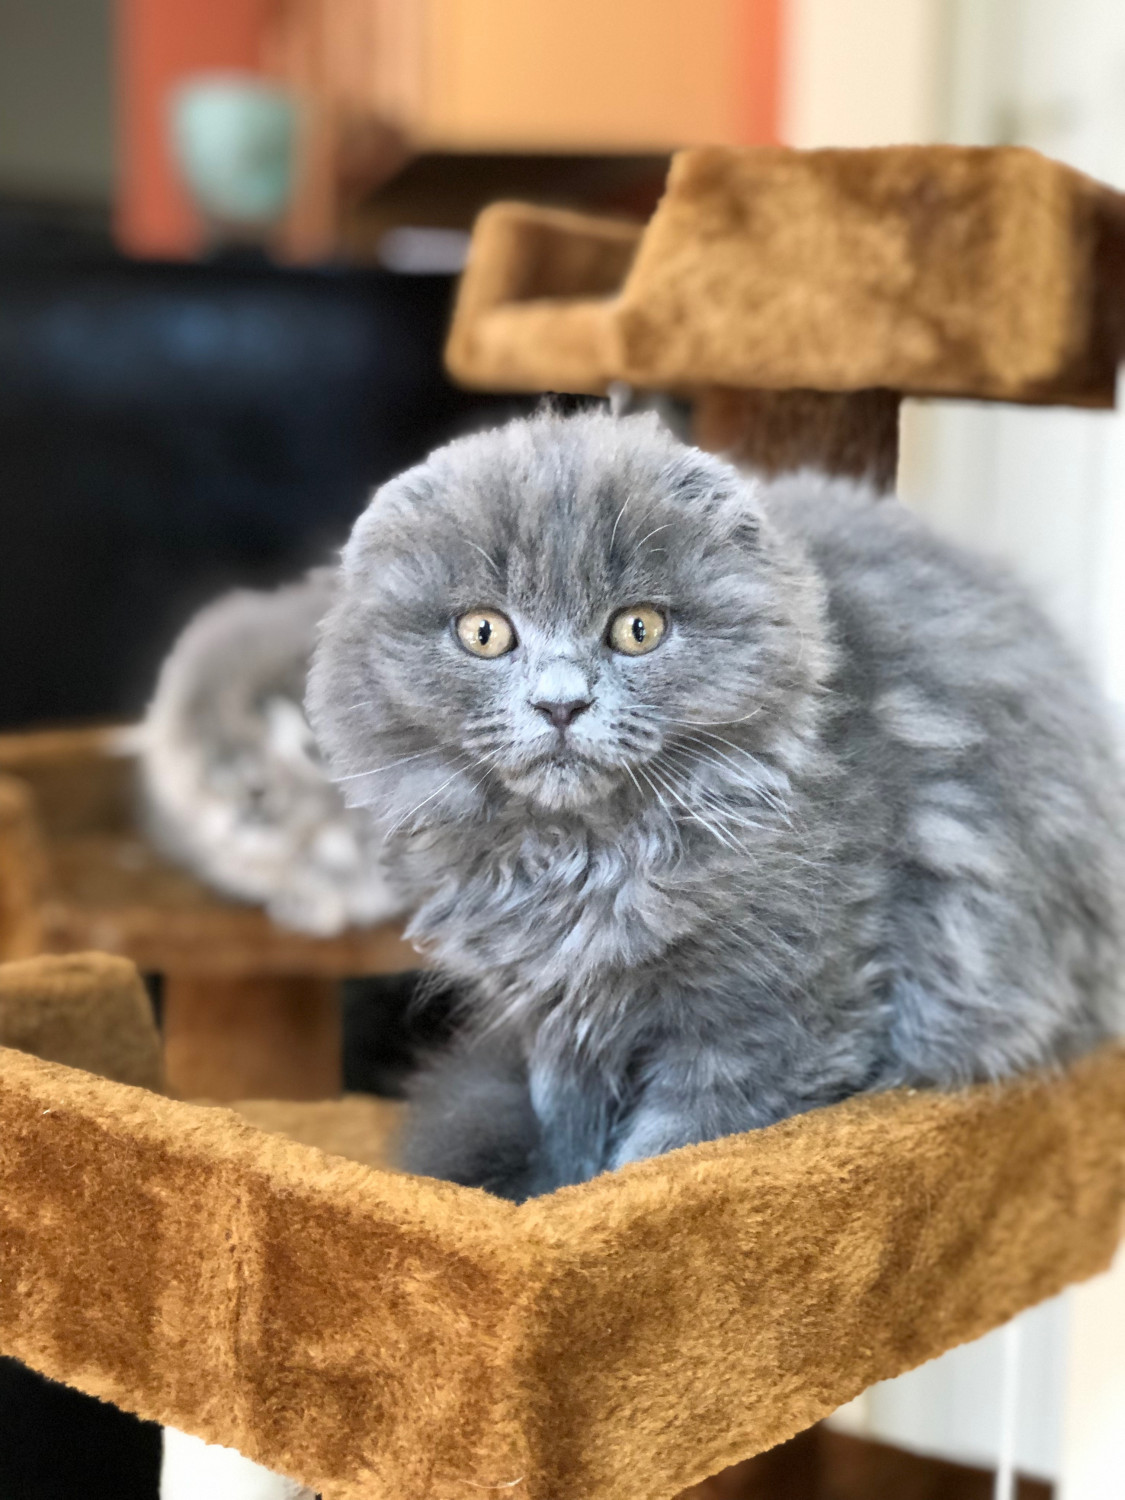 60 HQ Pictures Scottish Fold Cat For Sale : Scottish Fold X kittens for sale | Coventry, West Midlands ...